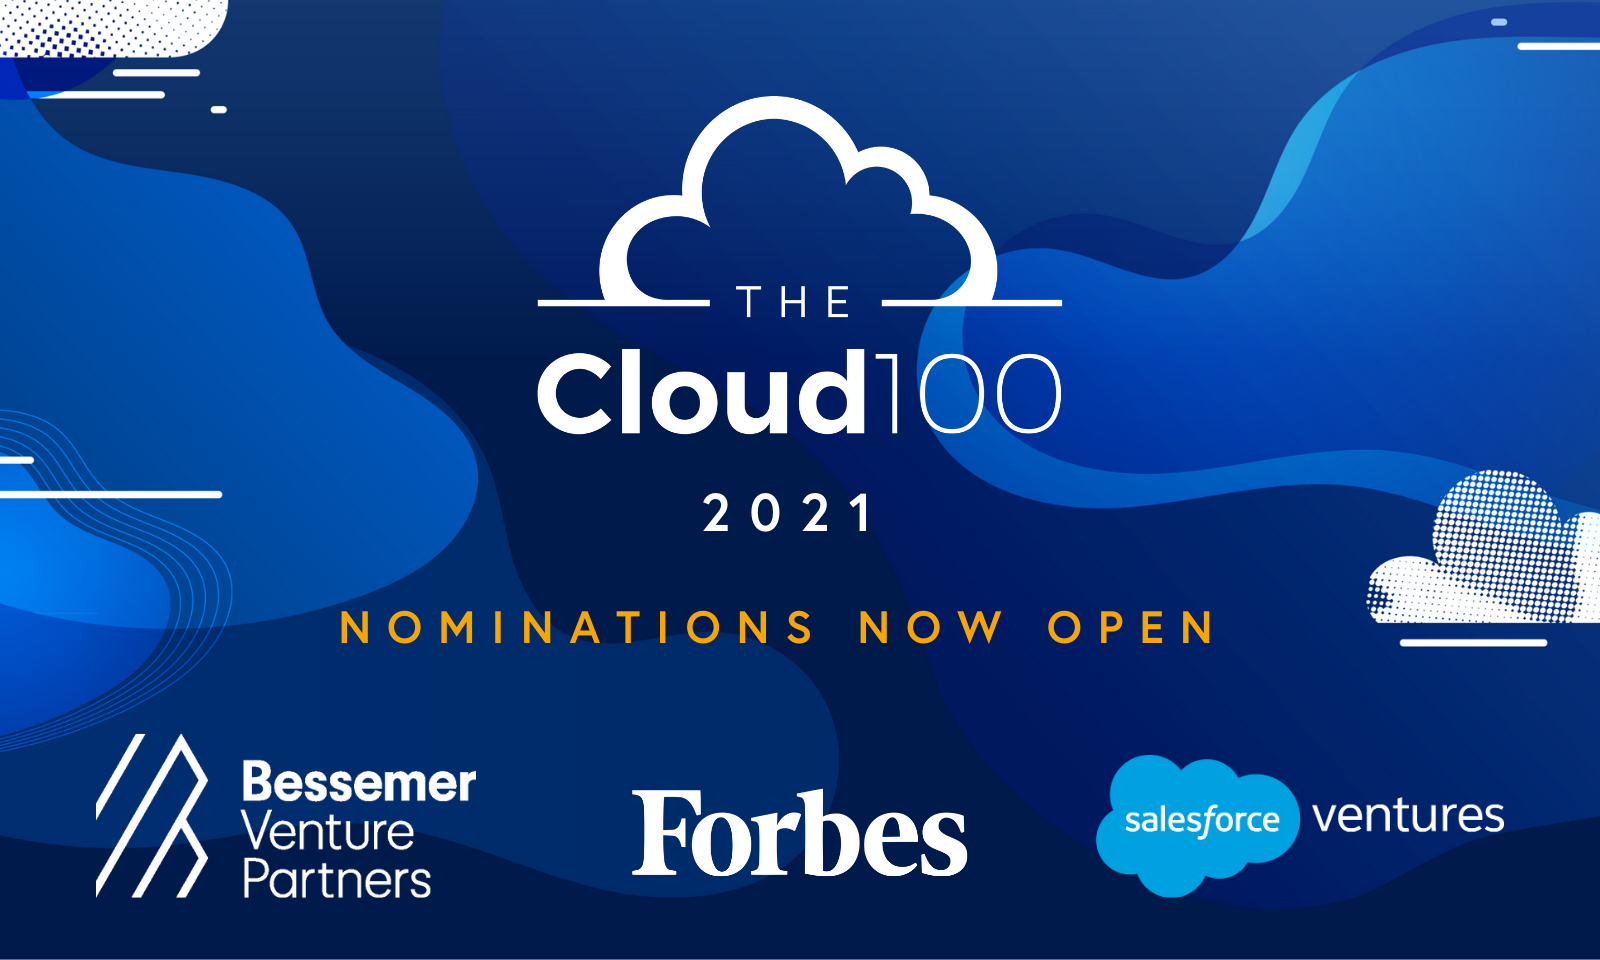 The Forbes Cloud 100 returns for 2021 · Bessemer Venture Partners